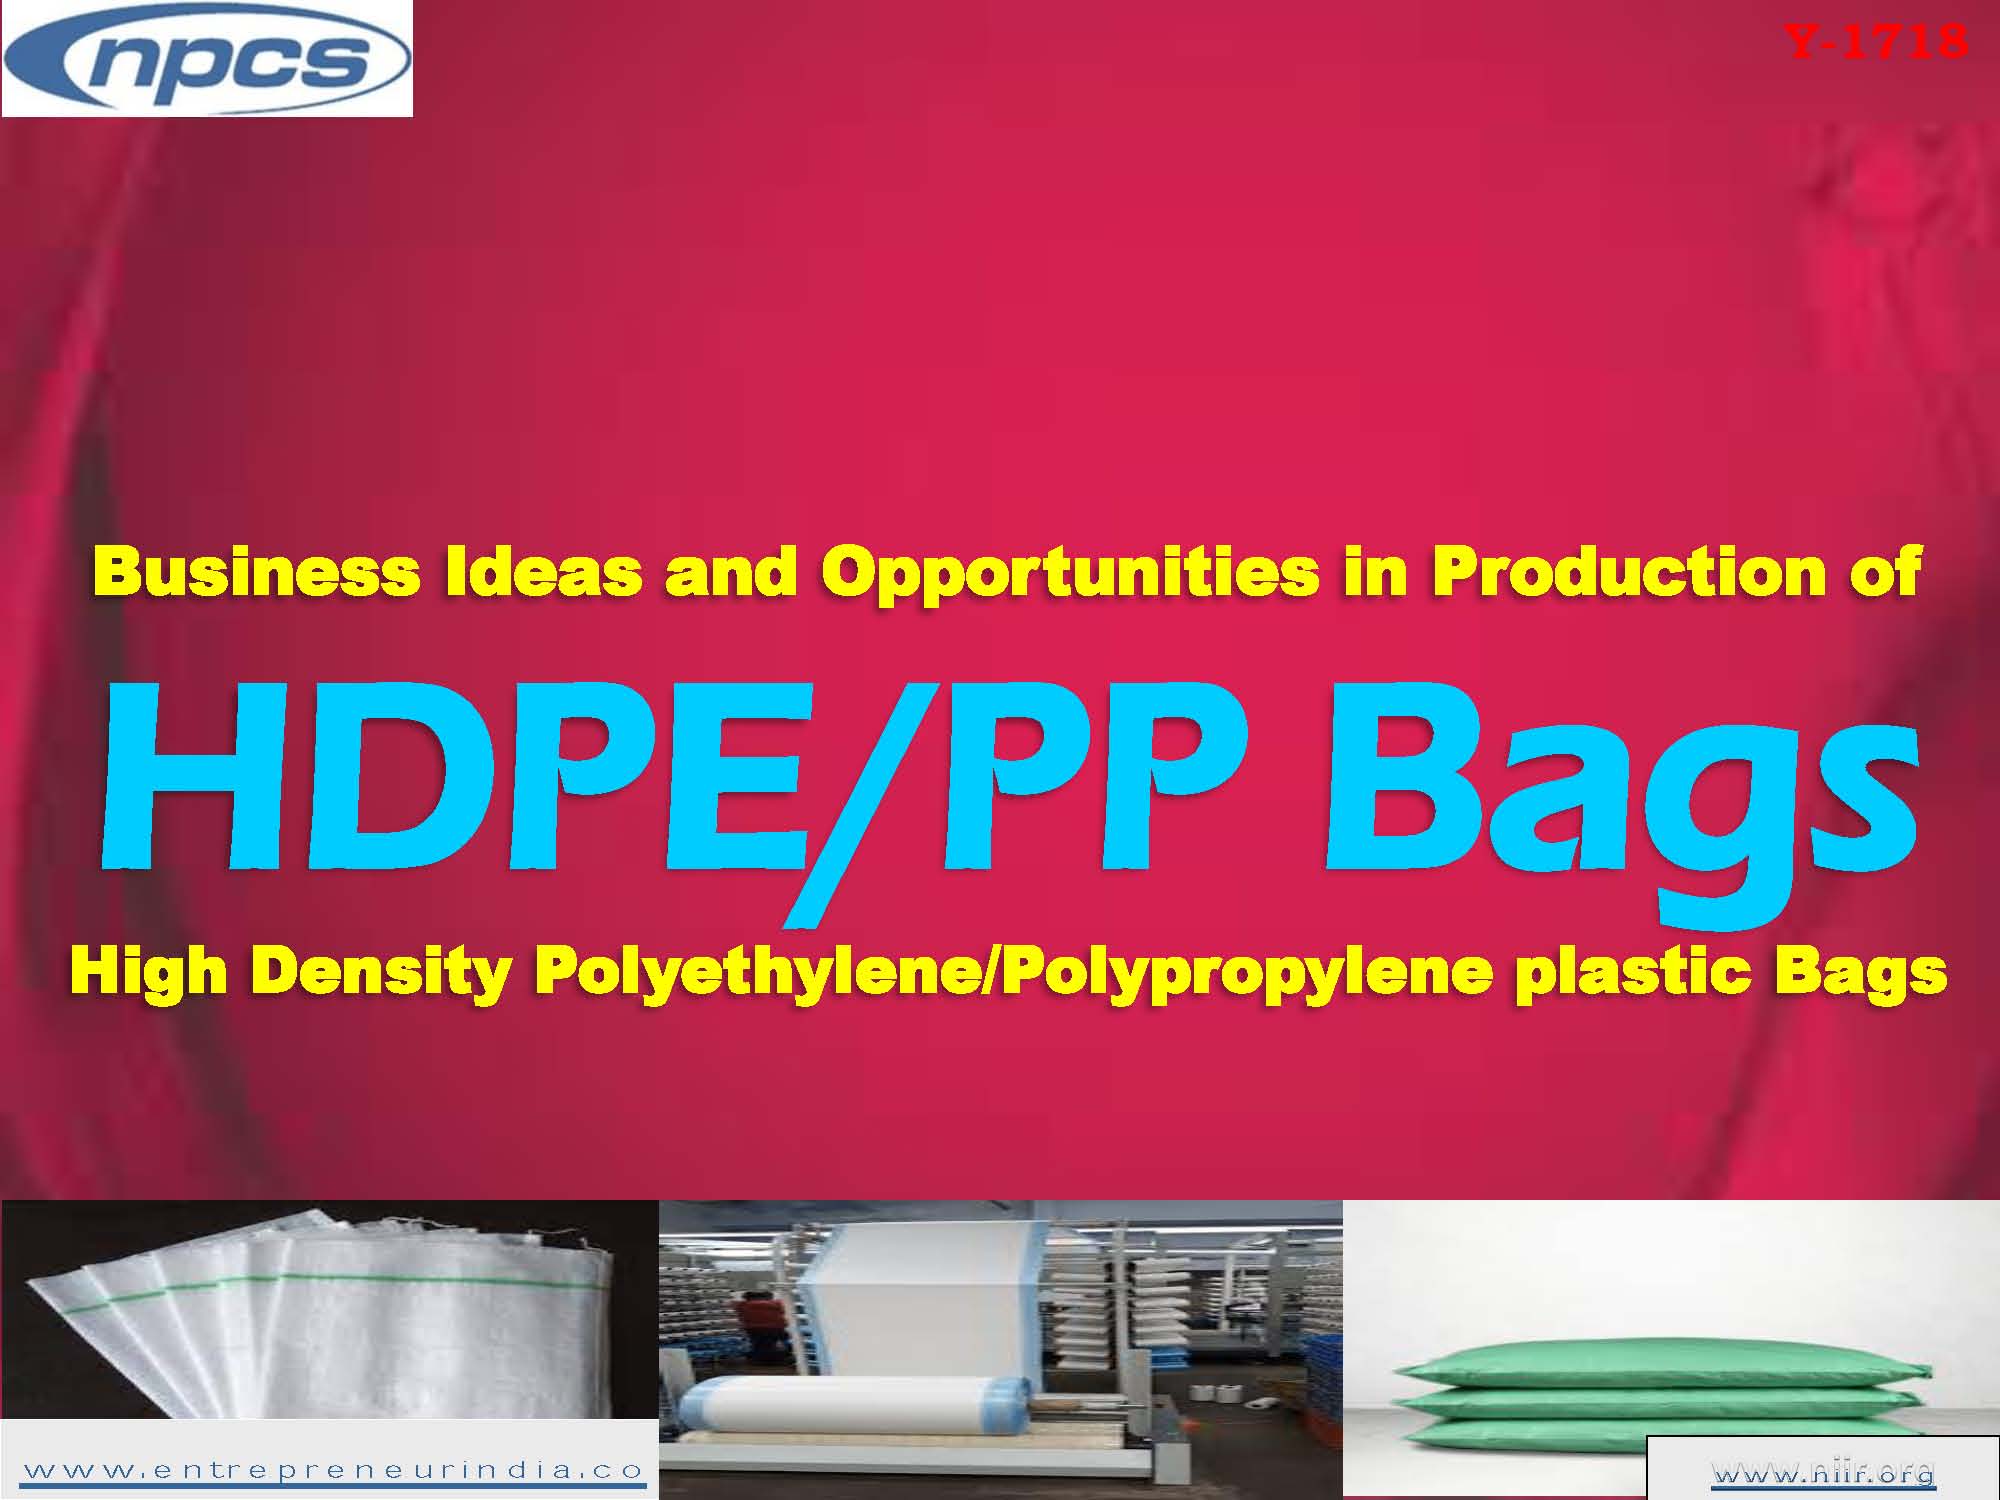 Business Ideas and Opportunities in Production of High Density Polyethylene (HDPE) Polypropylene plastic (PP) Bags